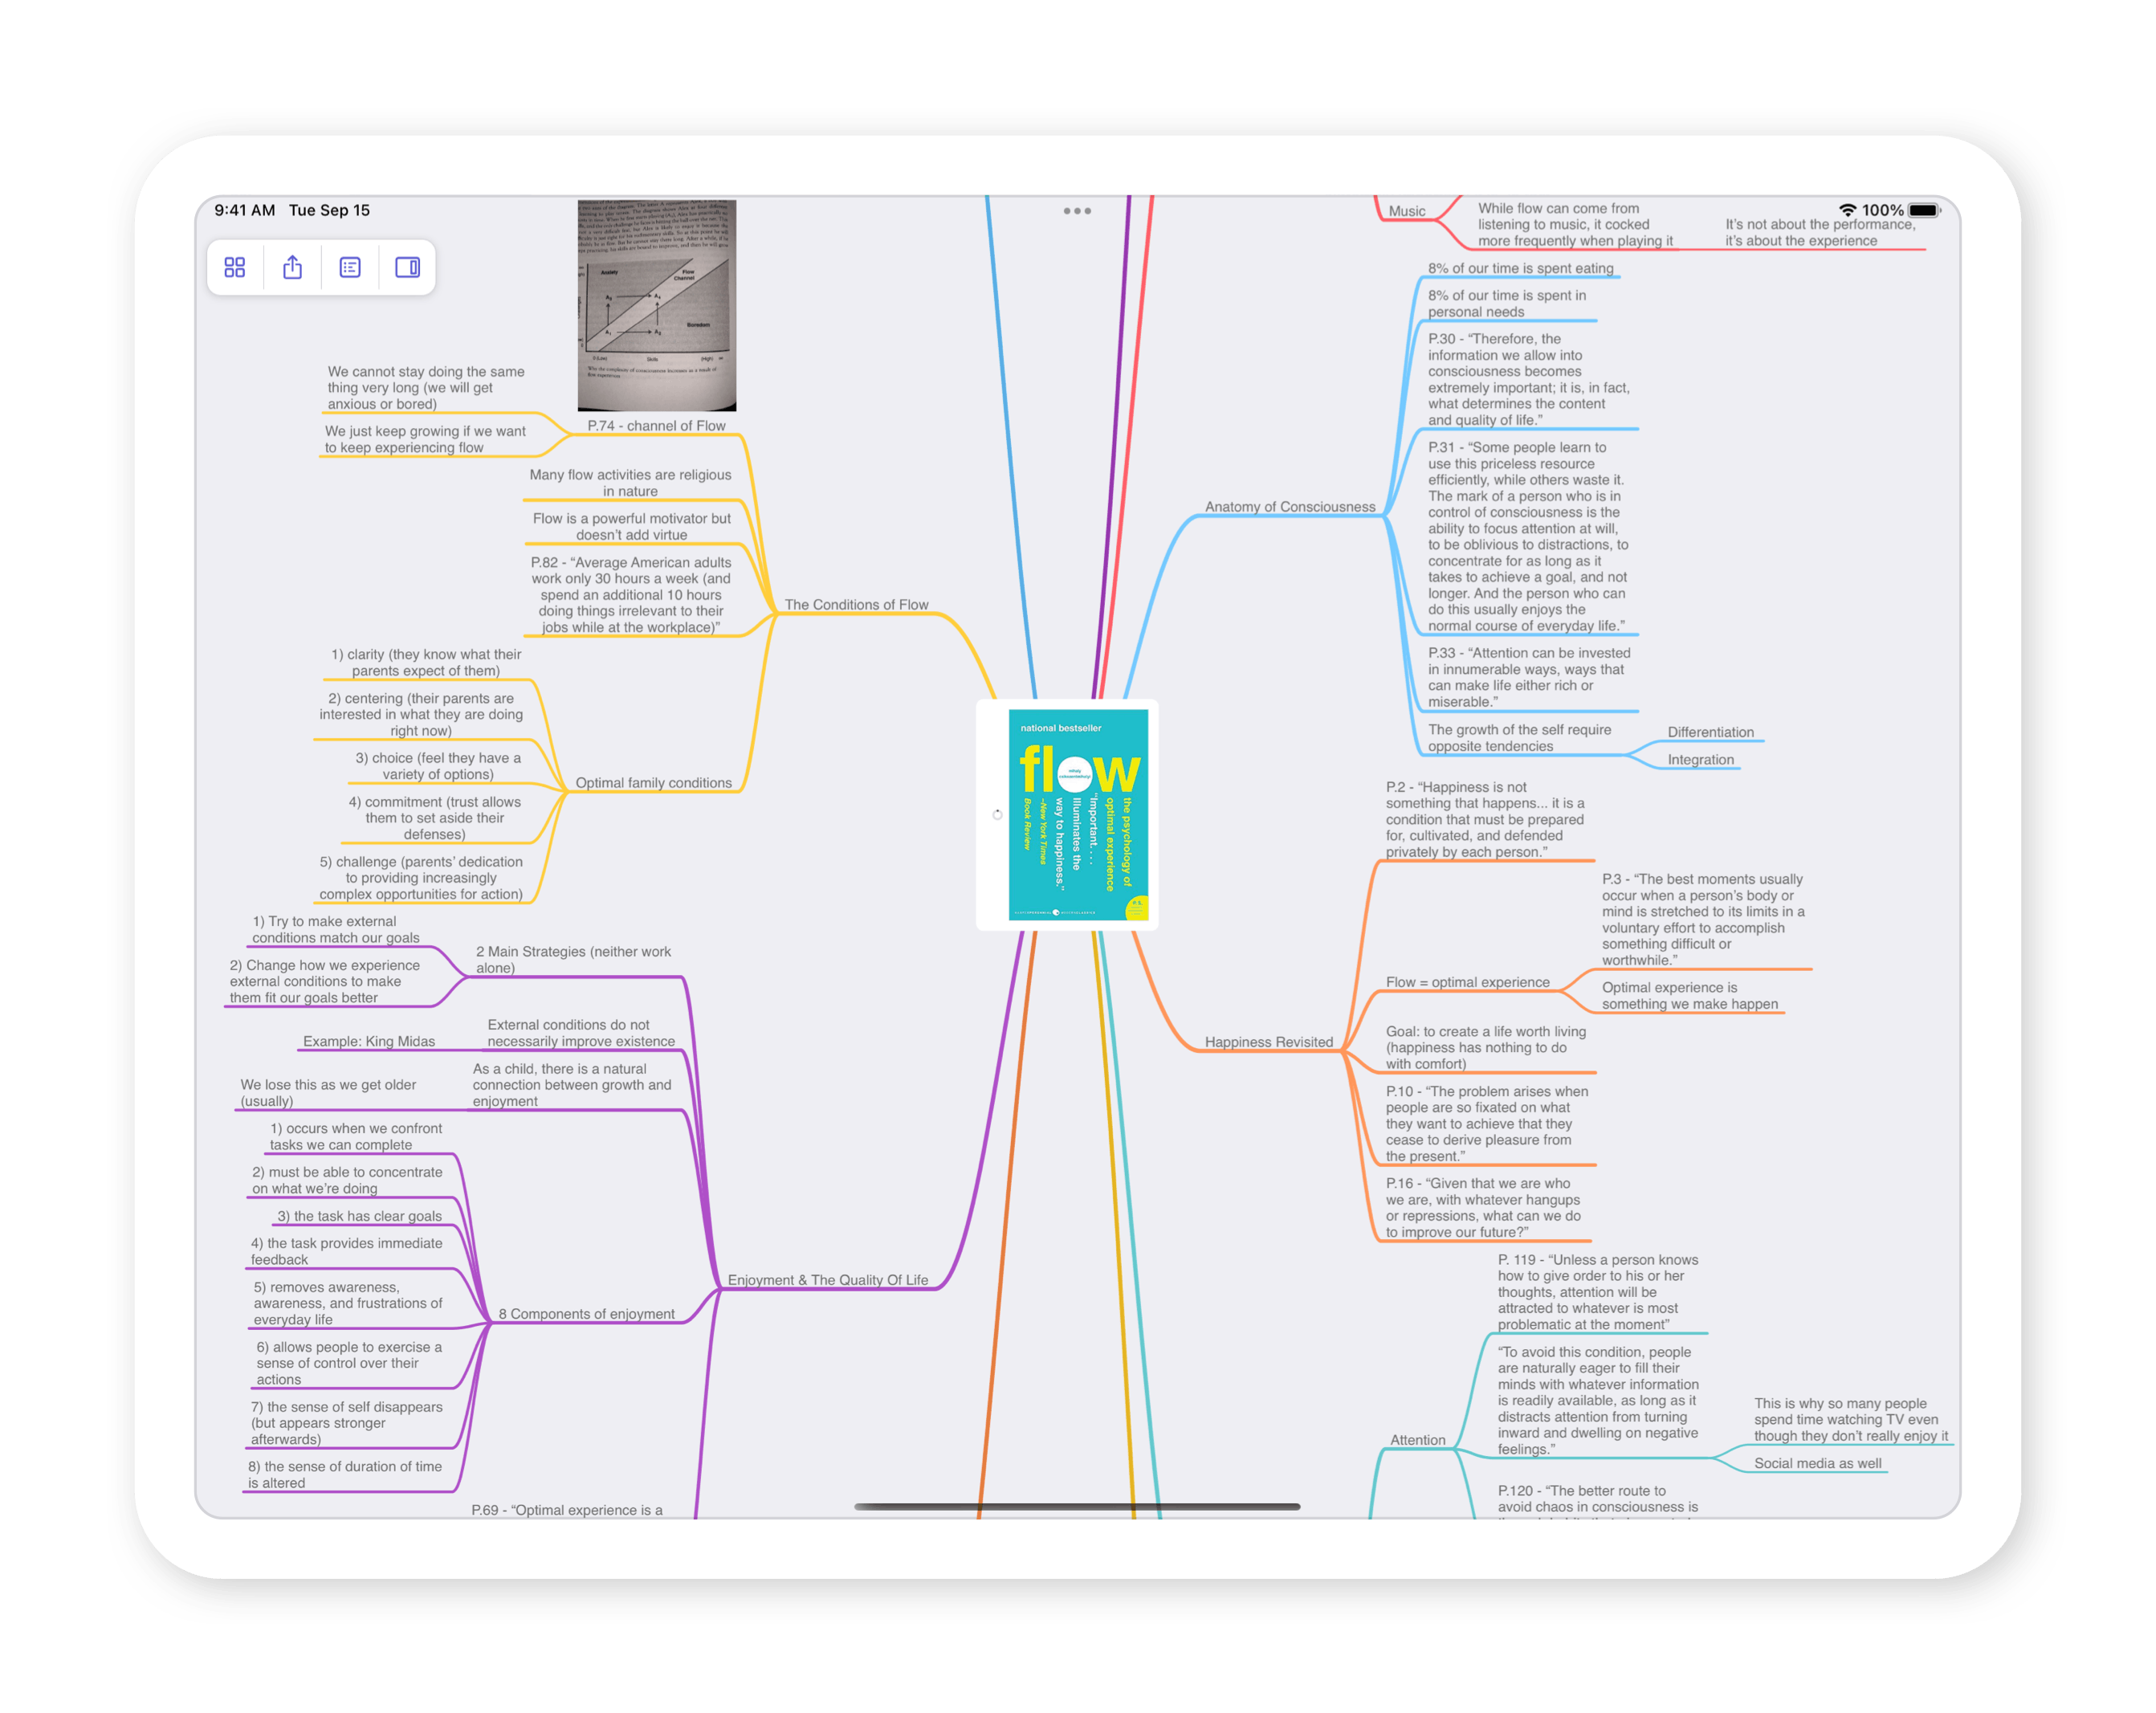 A mind map showing Mike's book notes